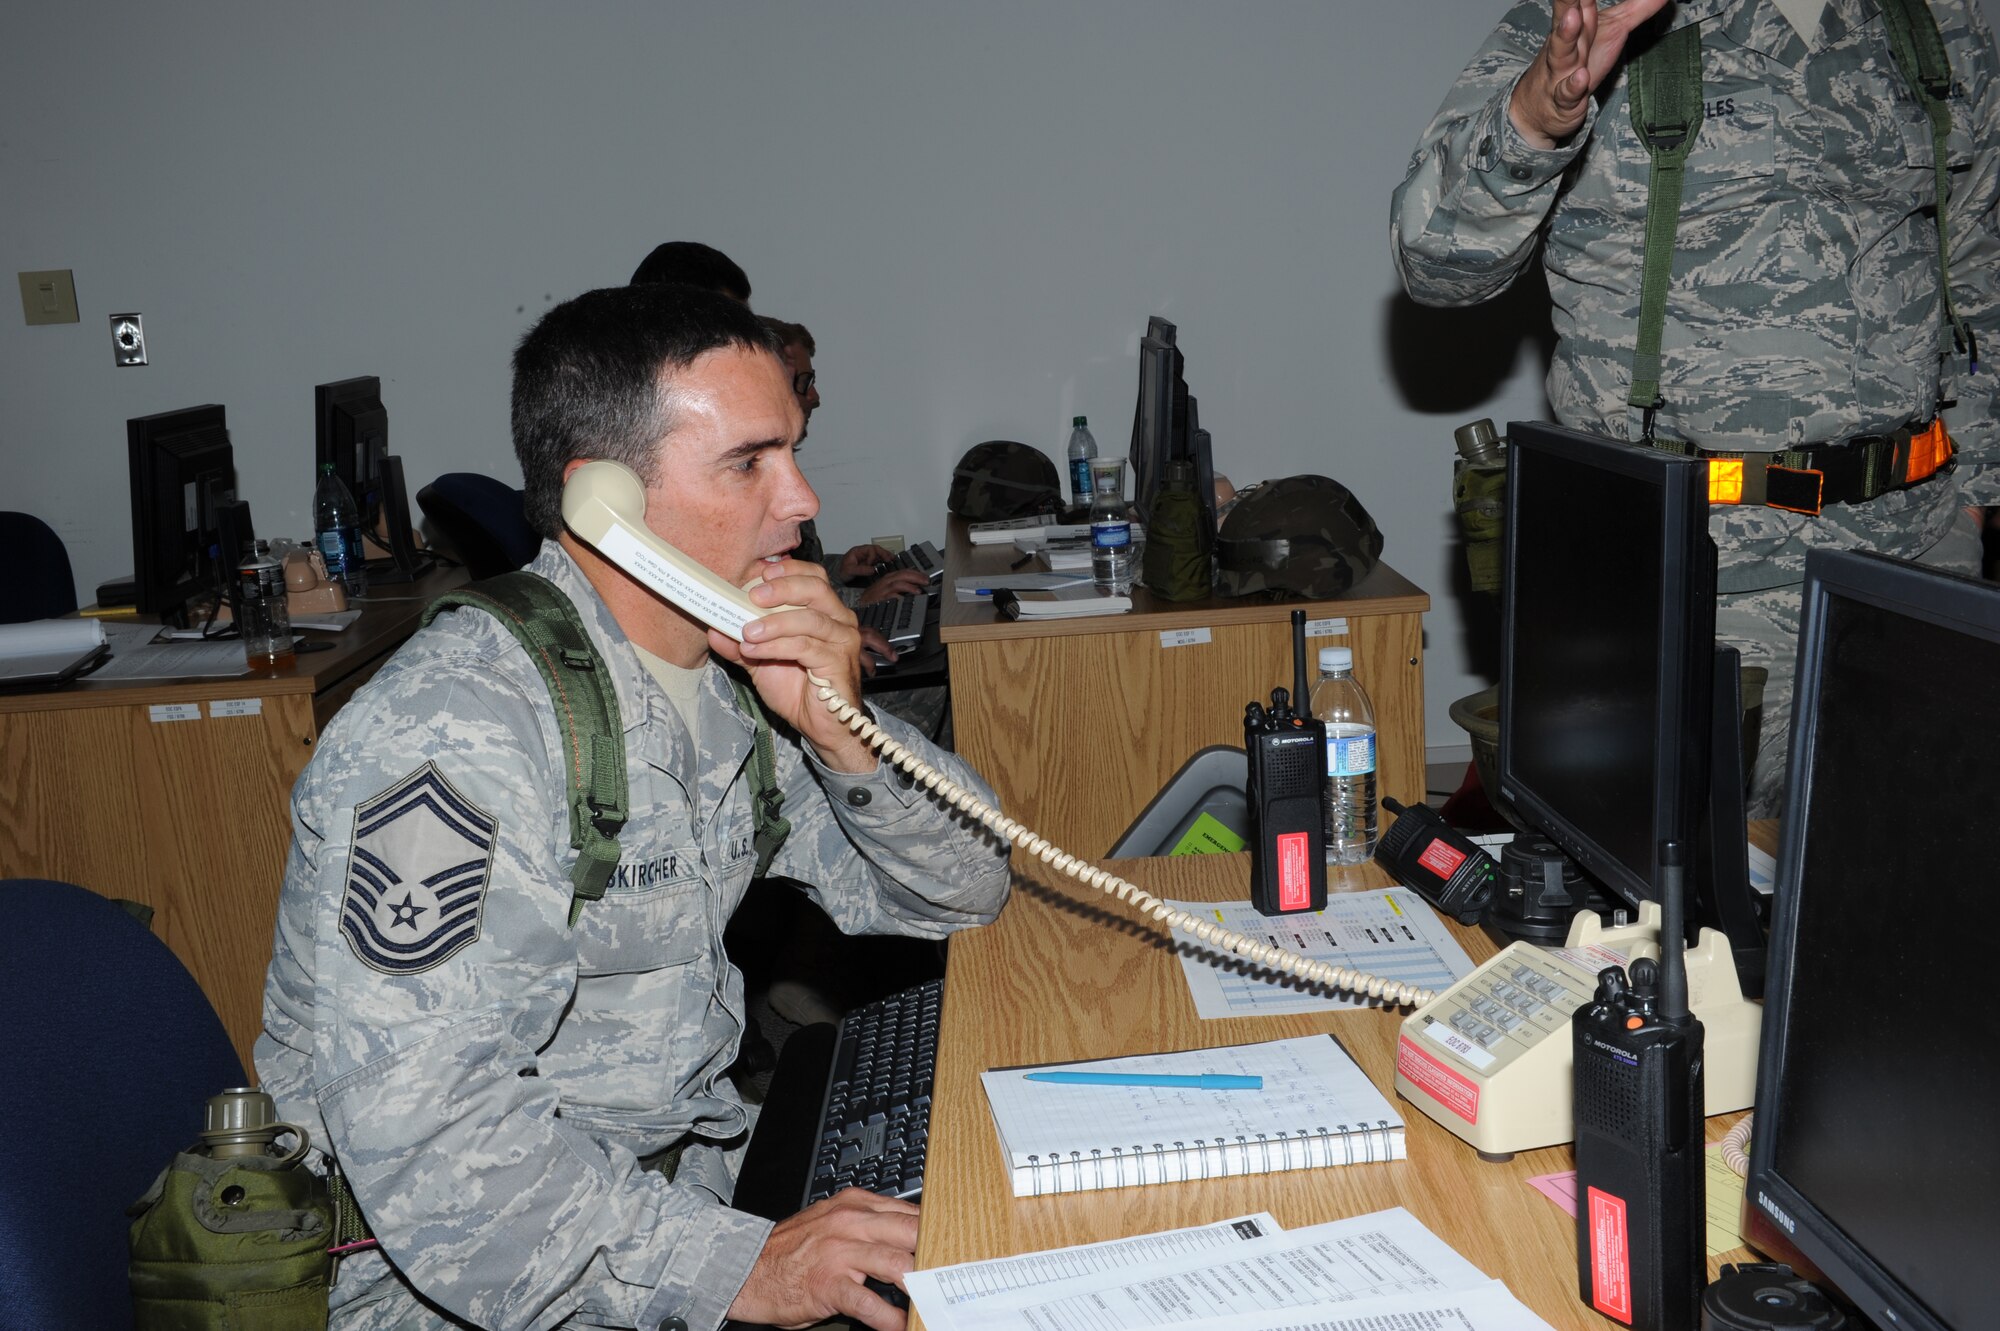 Senior Master Sgt. Gary Weiskircher of the 124th Logistics Readiness Squadron acts as the Transportation Representative in the wing's Emergency Operations Center as part of an Operational Readiness Exercise on 5 August, 2010 held in Boise, Idaho. (Air Force photo by Tech. Sgt. Becky Vanshur)(Released)